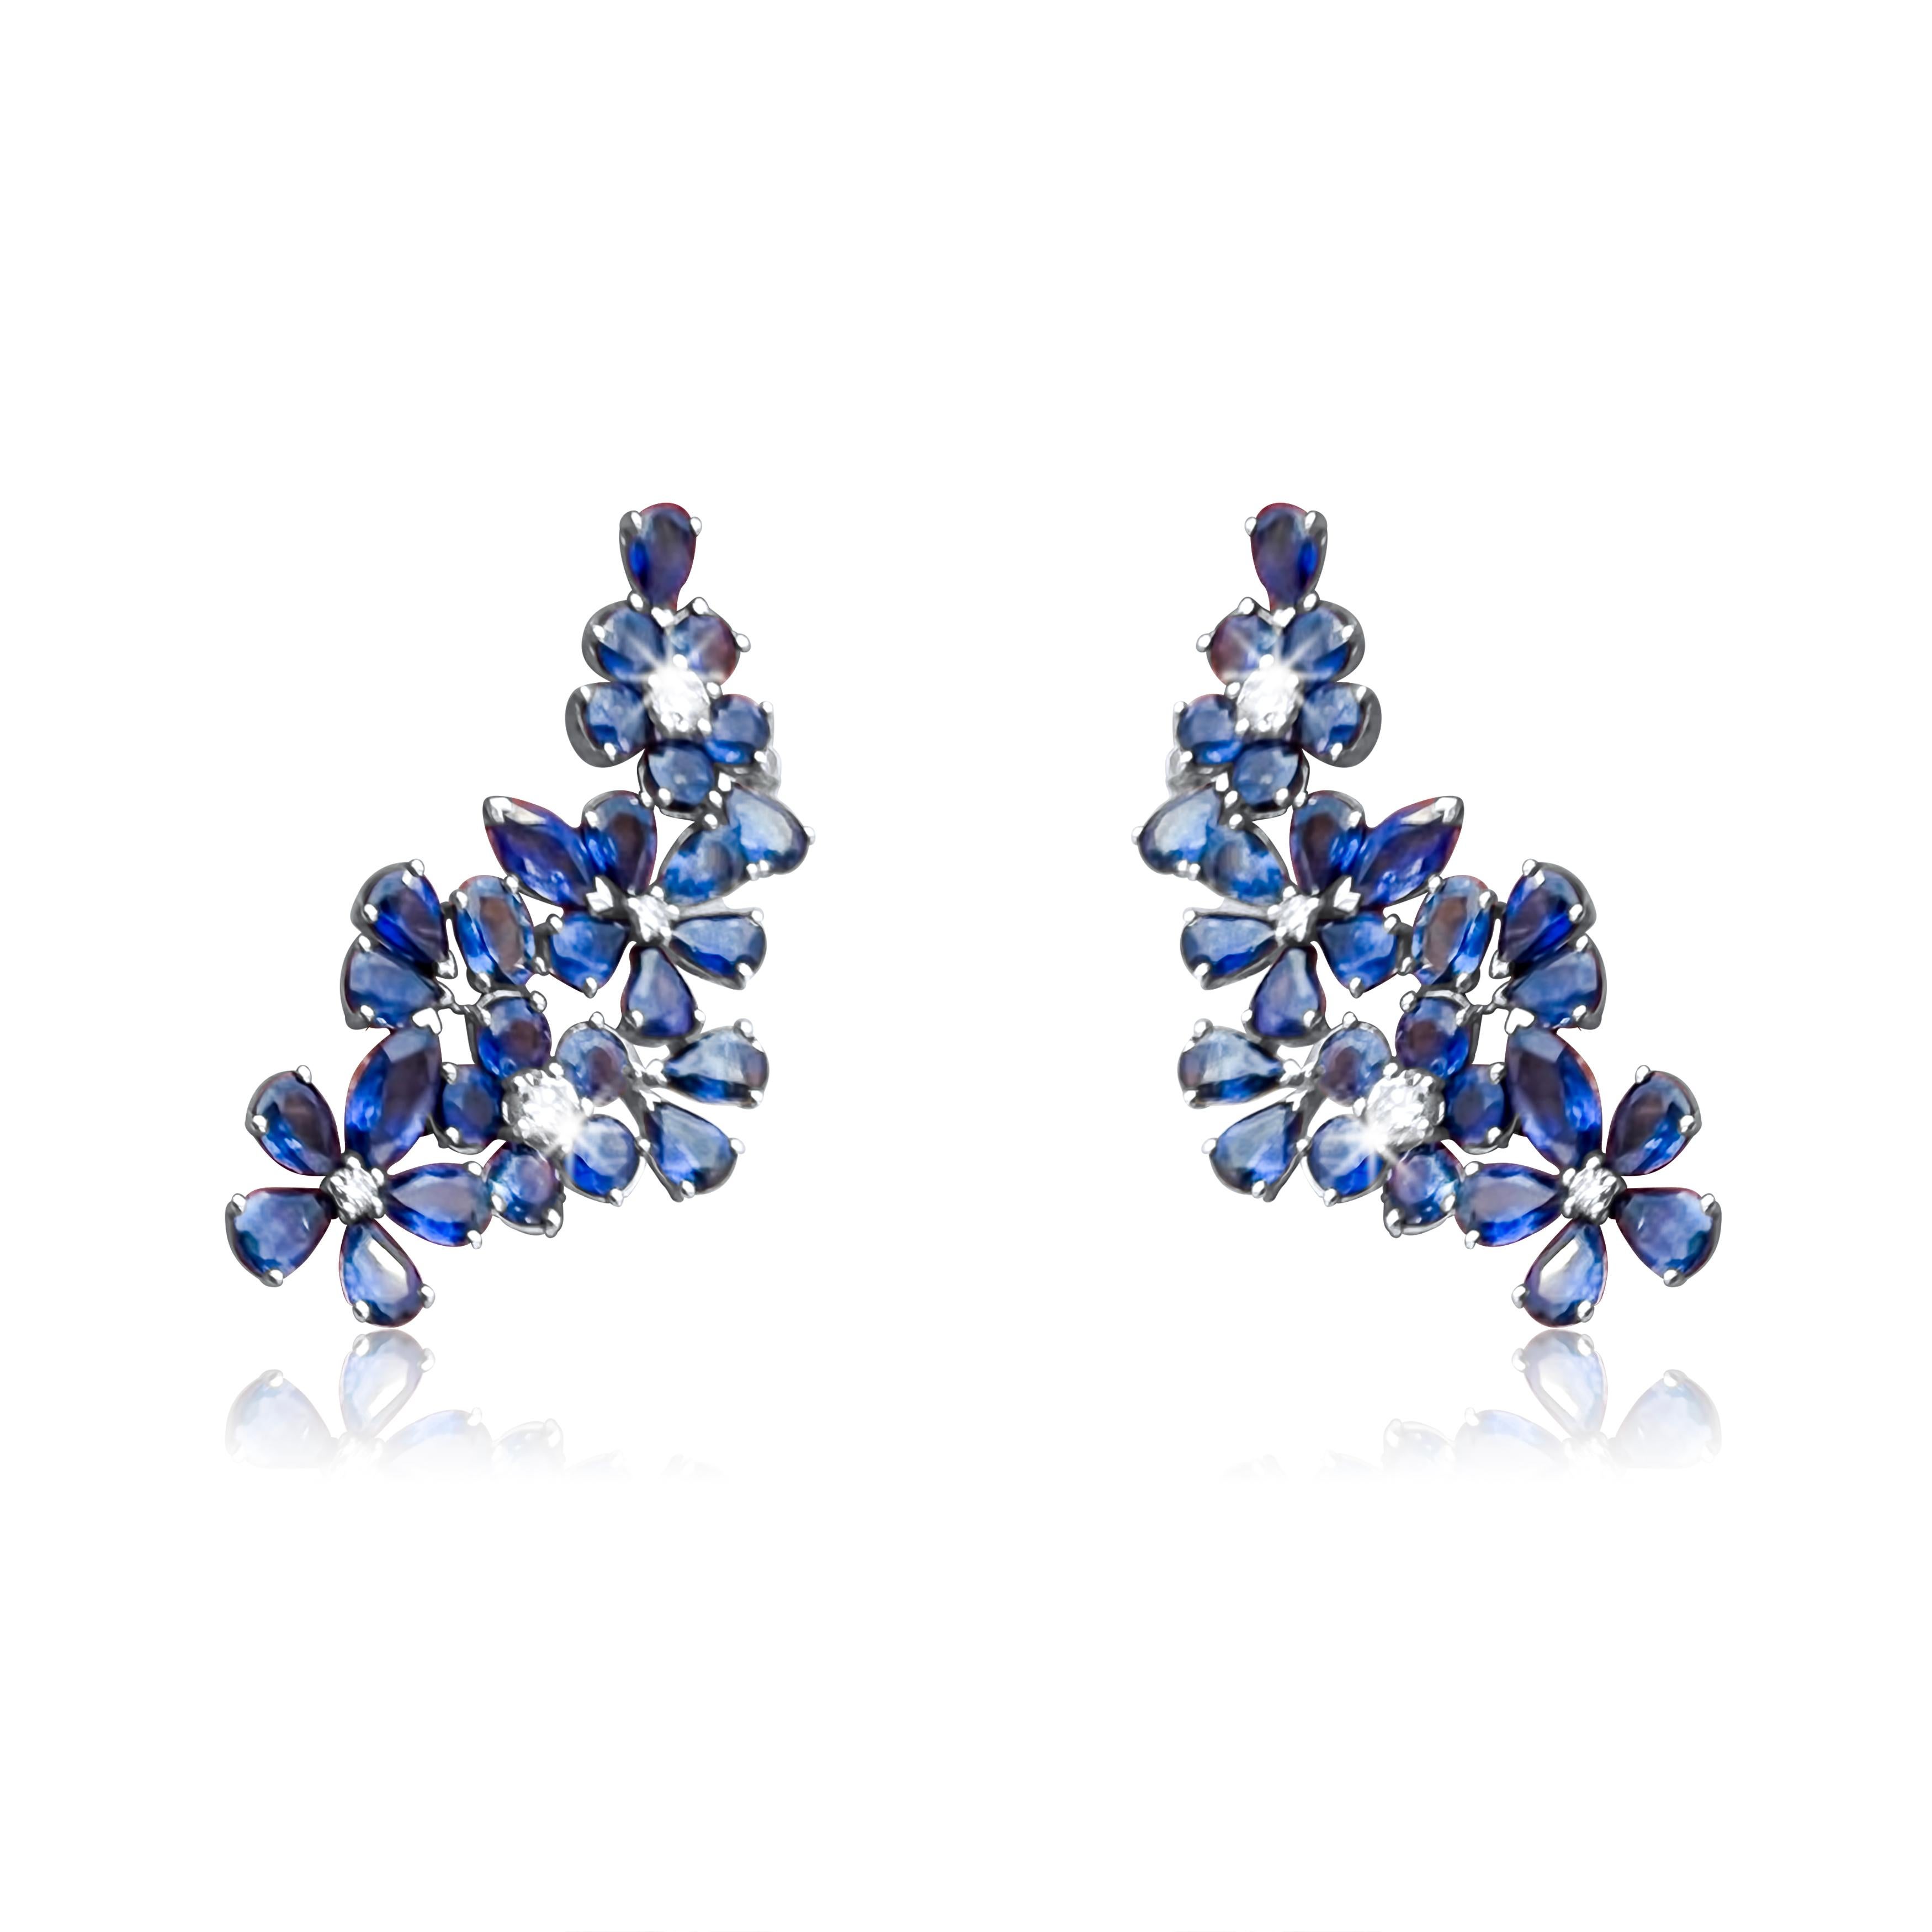 Sophia's Radiance

Earring Information
Metal Purity : 18K
White Gold
Gold Weight : 13.50g
Overall Measurements : 1.88''
Diamond Count : 08
Carat weight : 0.90
Sapphires Count : 56
Carat weight for the sapphires : 22.50 ttcw
Serial #EA18283
